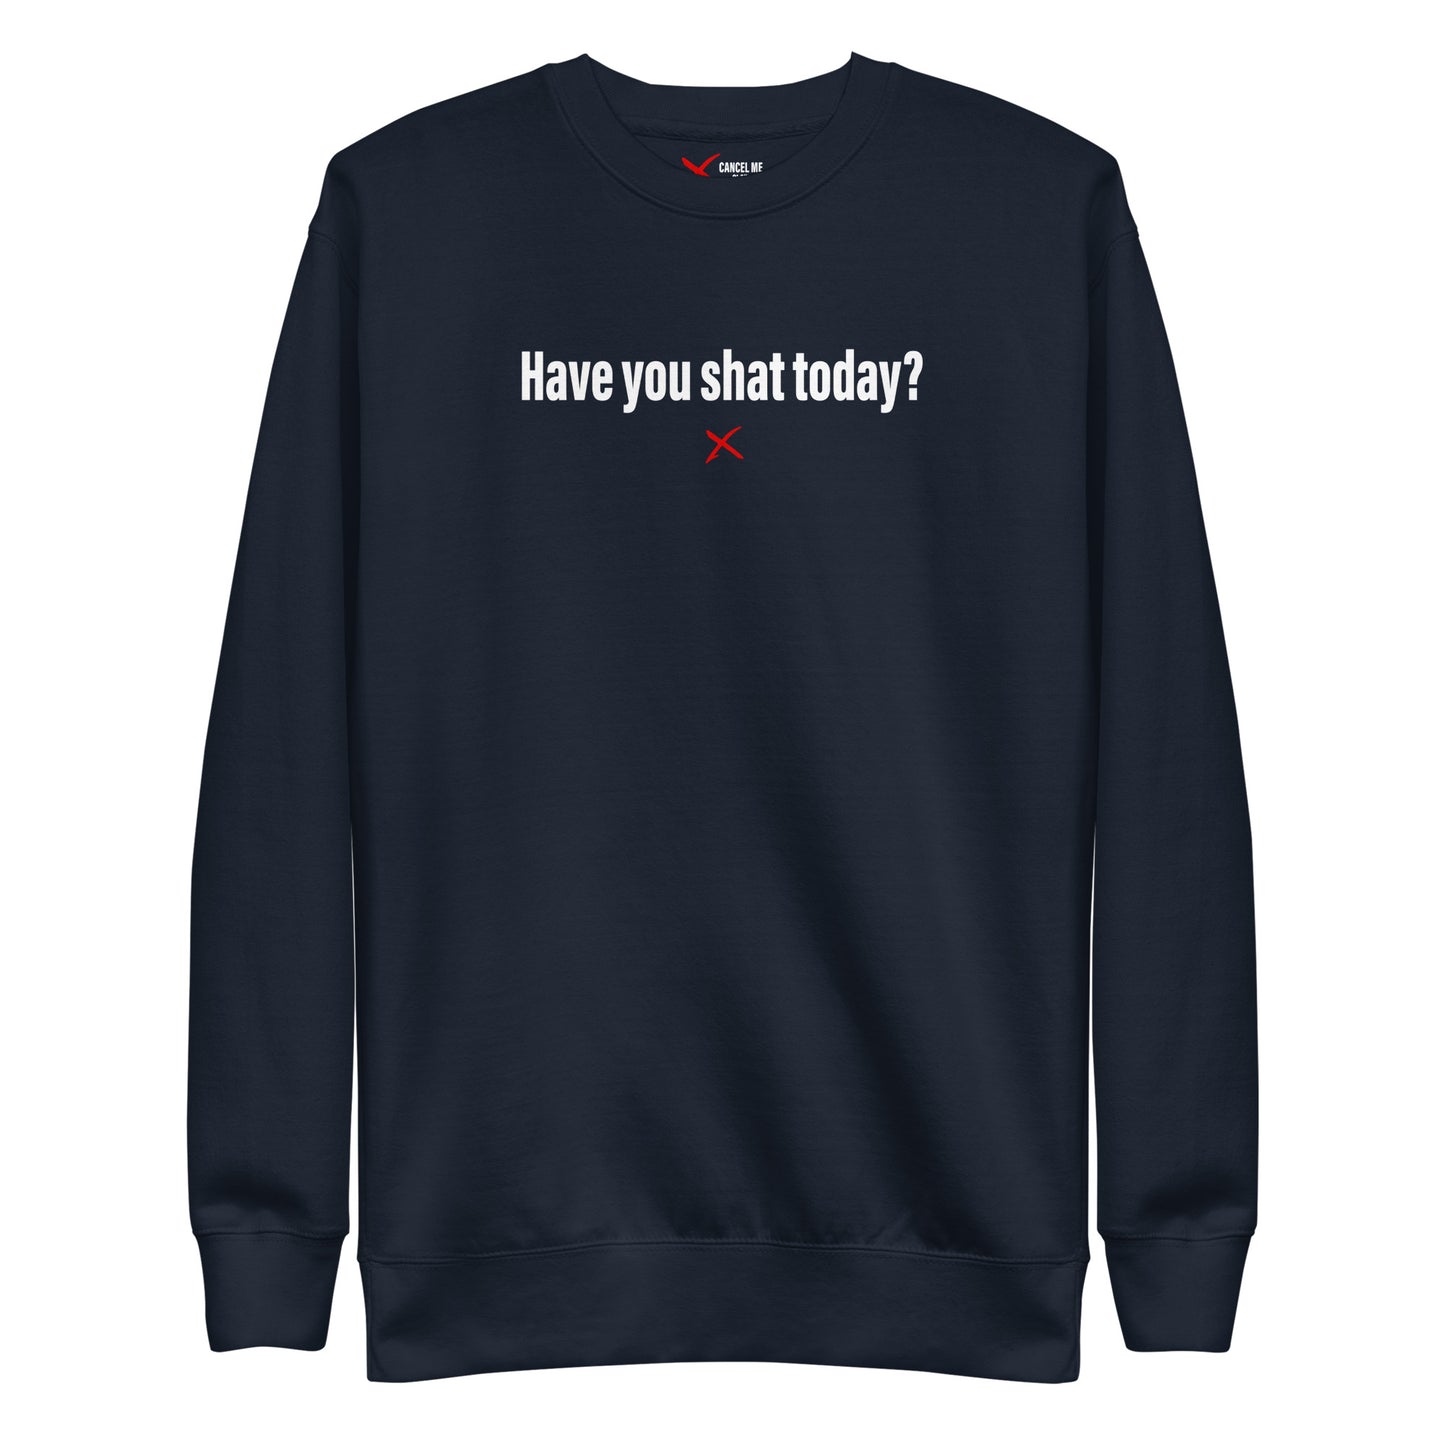 Have you shat today? - Sweatshirt